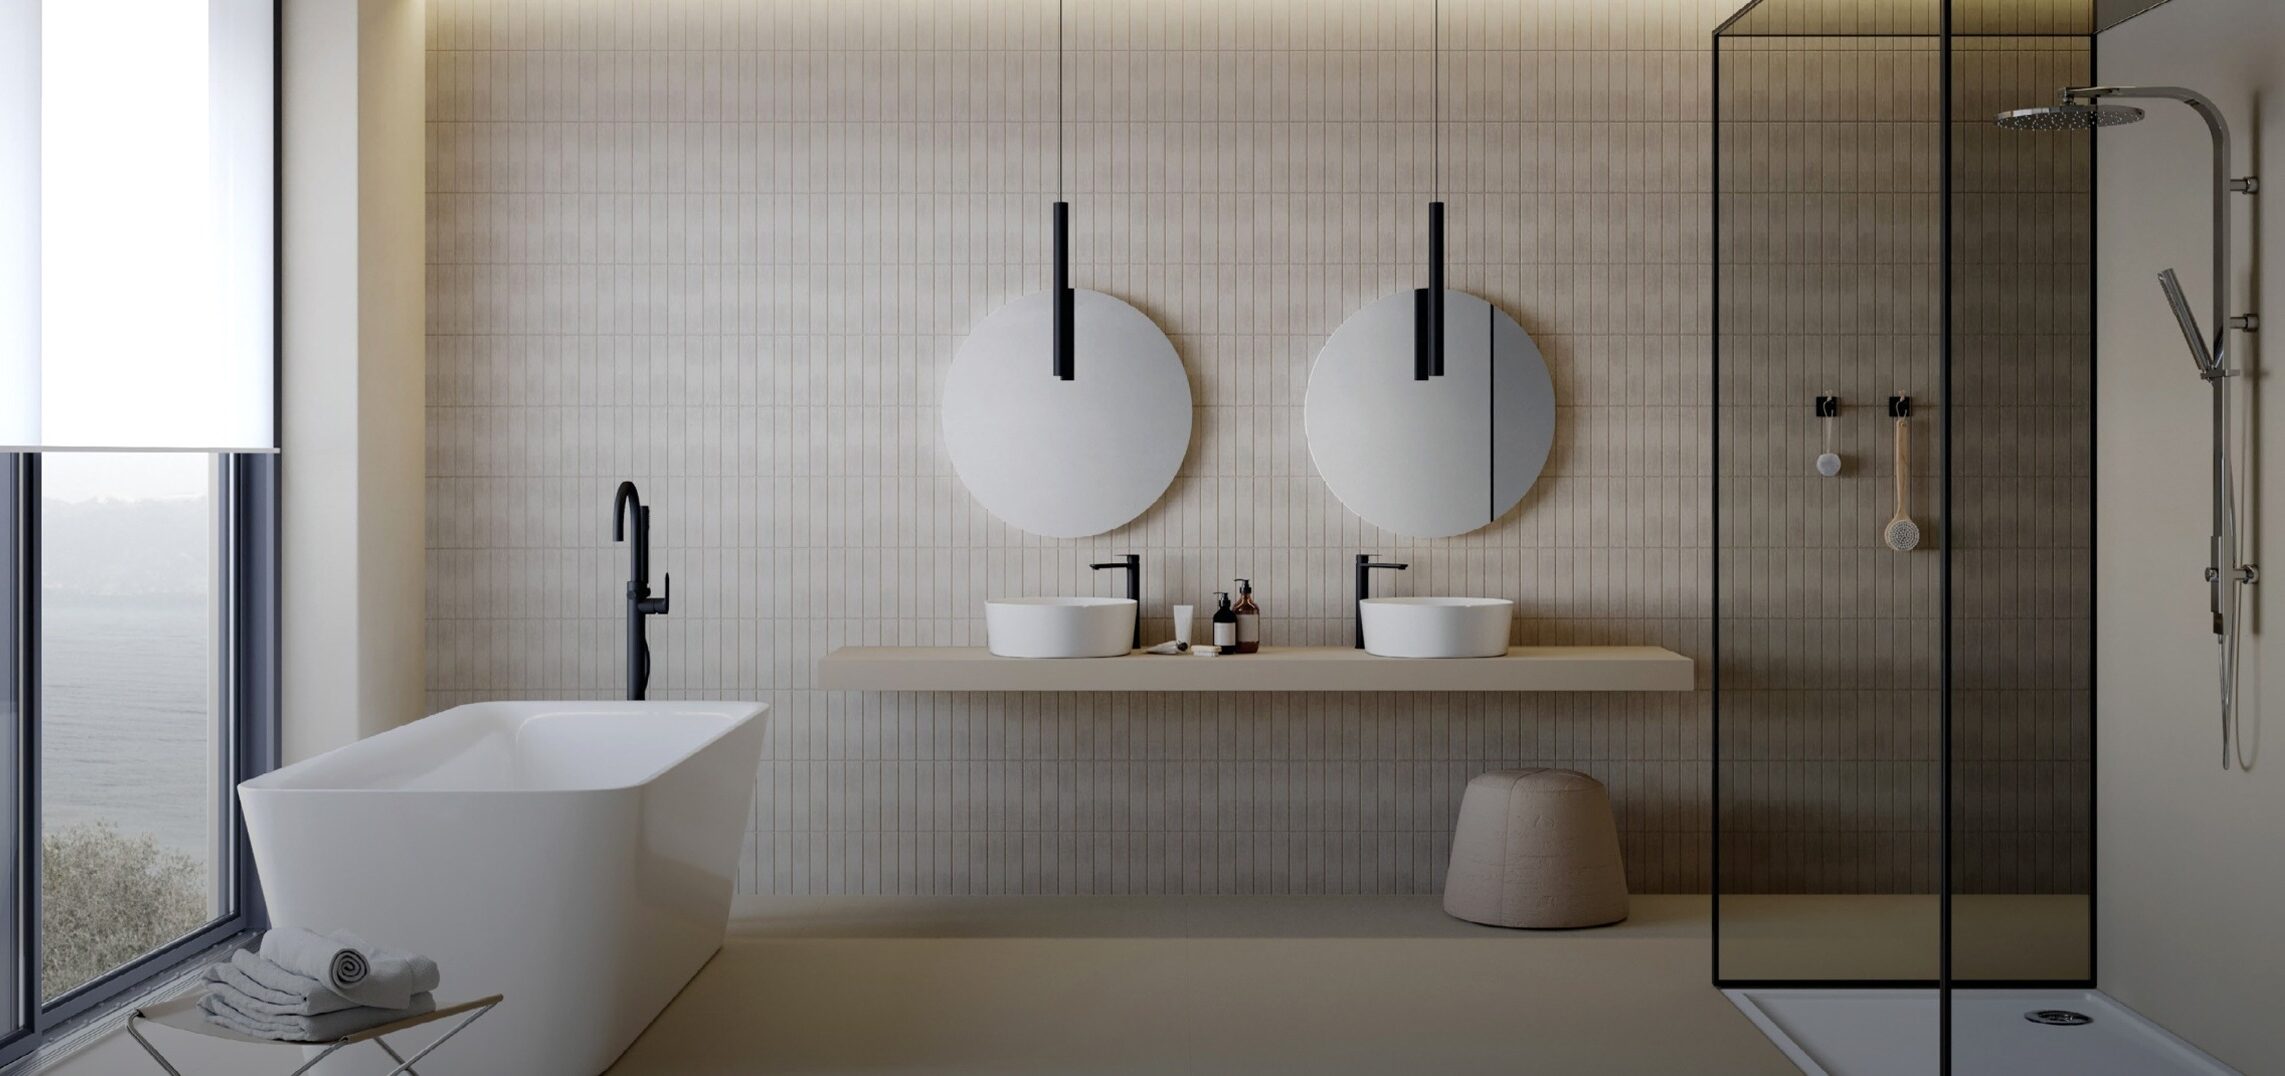 Introducing the New Era of Luxury Bathing in Bangalore: Sams Ceramics & Bath Fixtures Partners with Jaquar